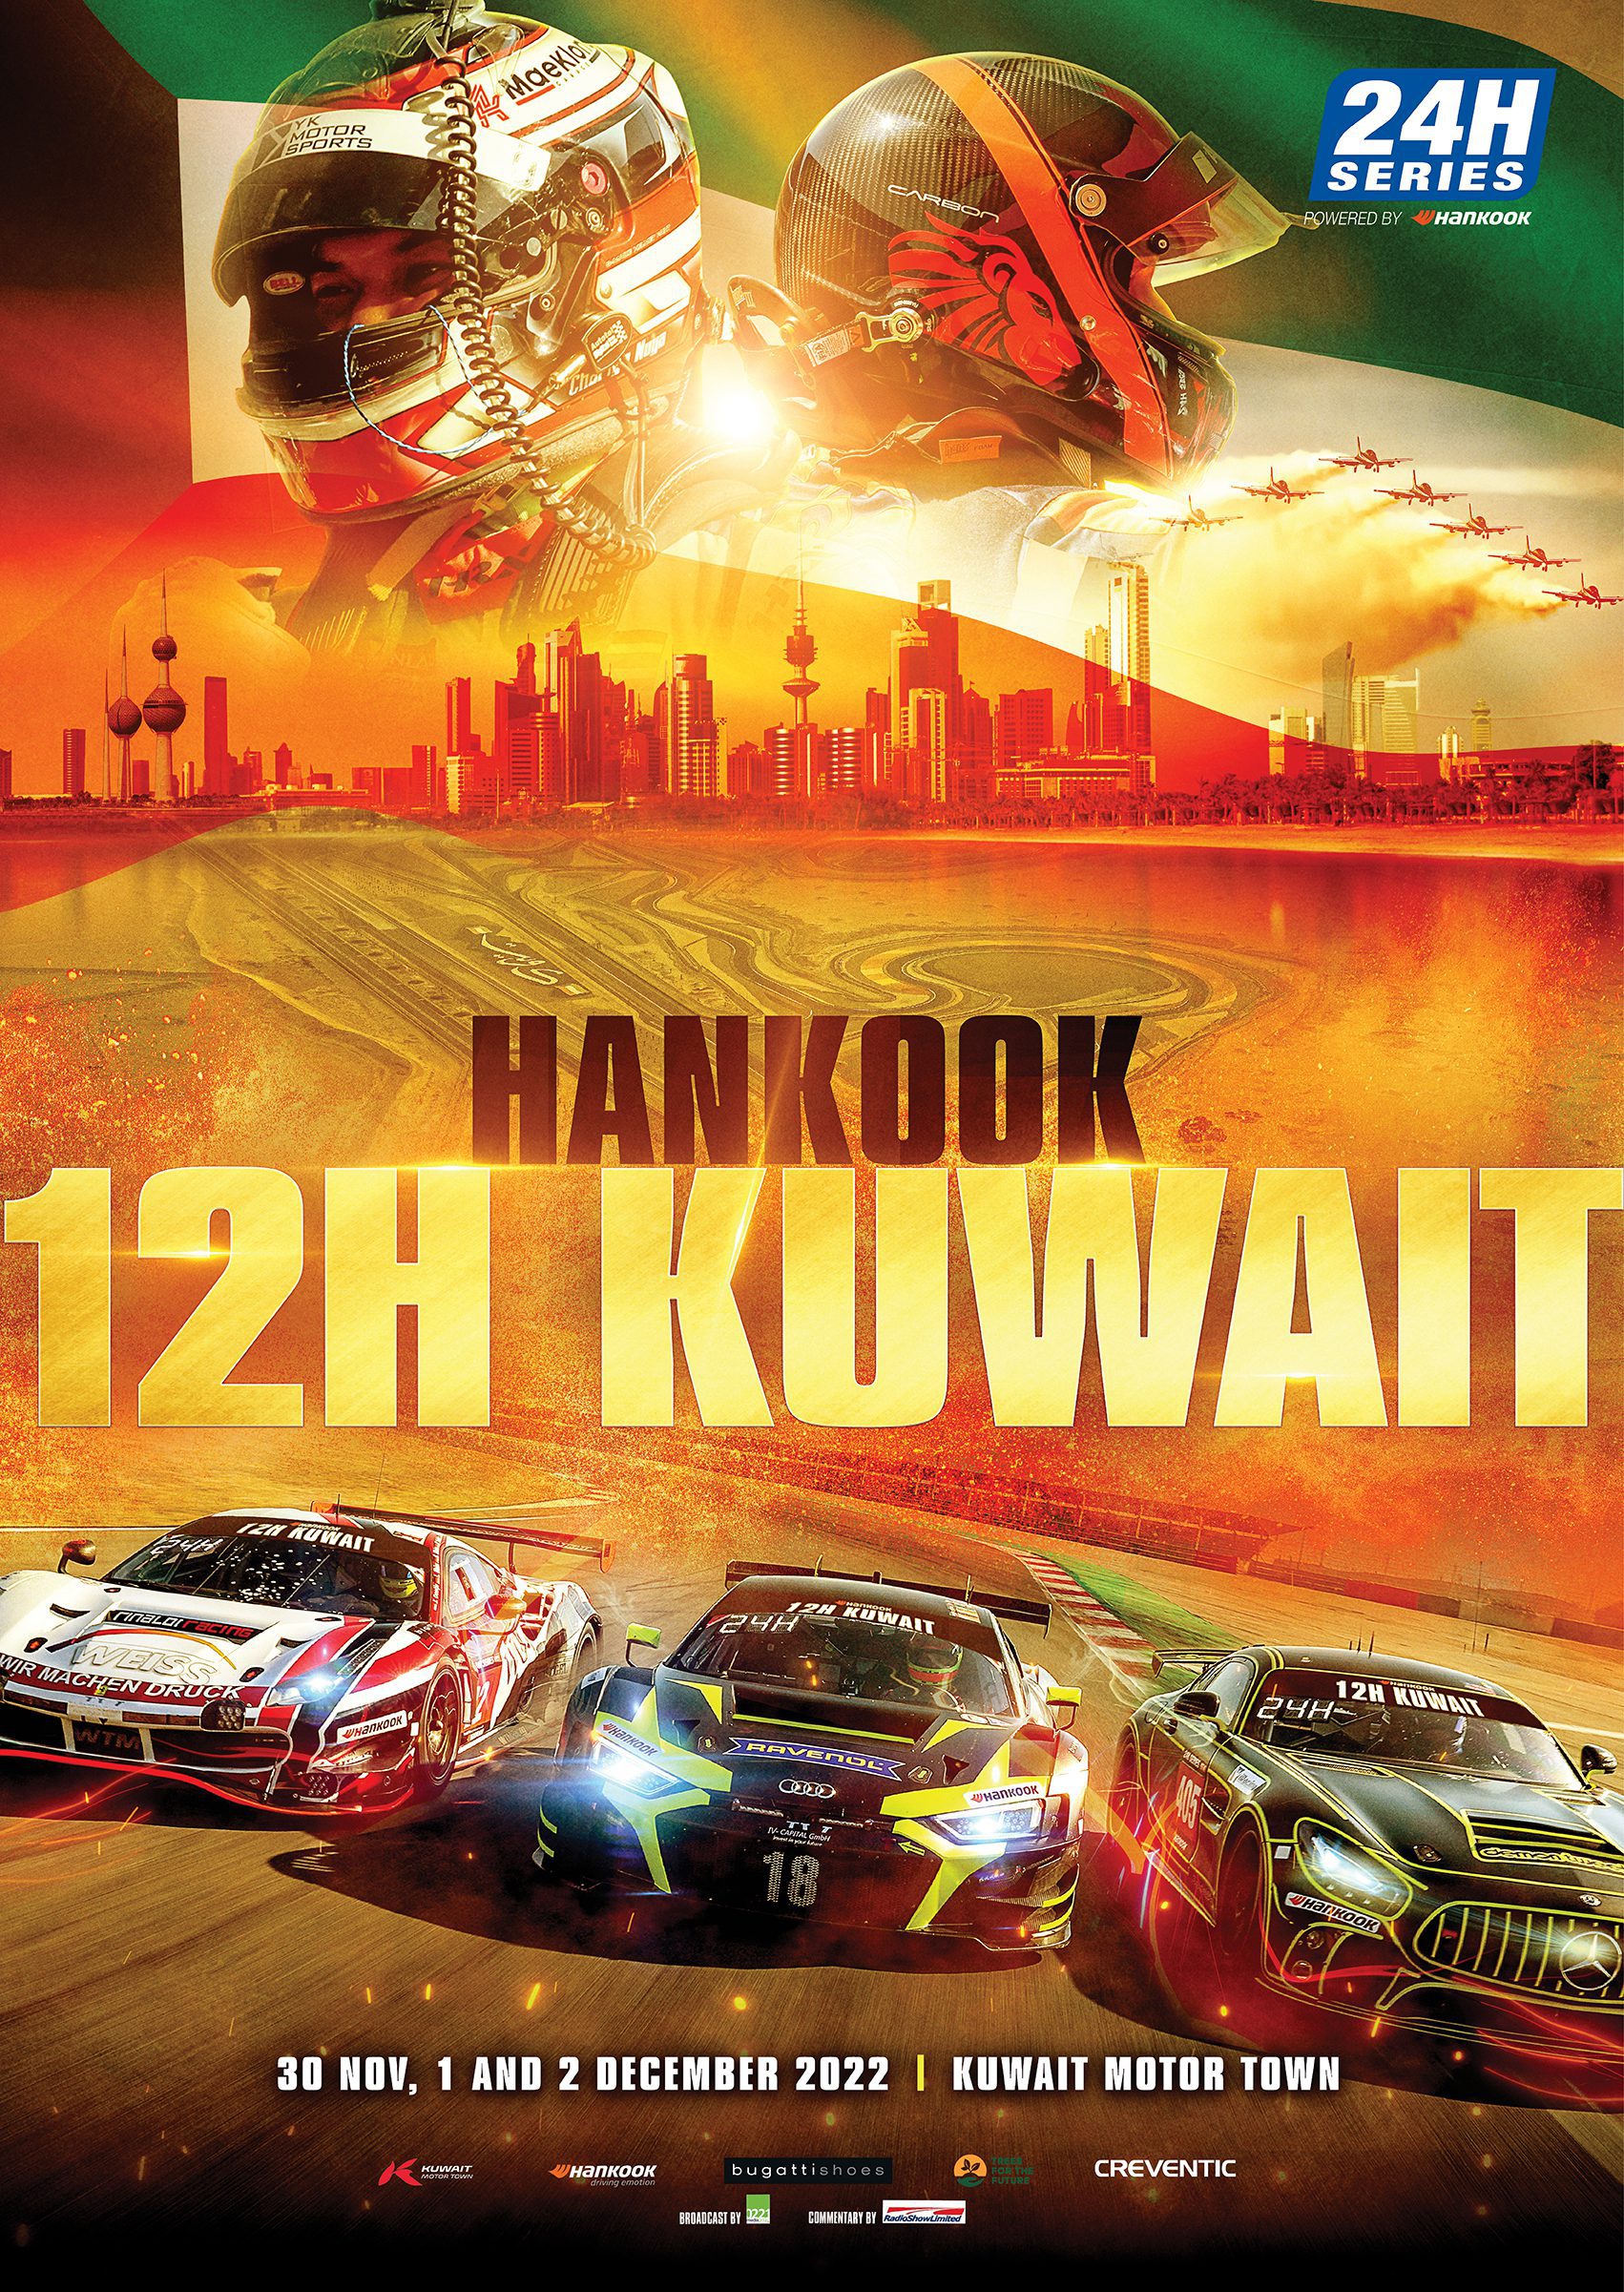 24H SERIES to race in Kuwait for the first time in 2022 Kuwait Motor Town